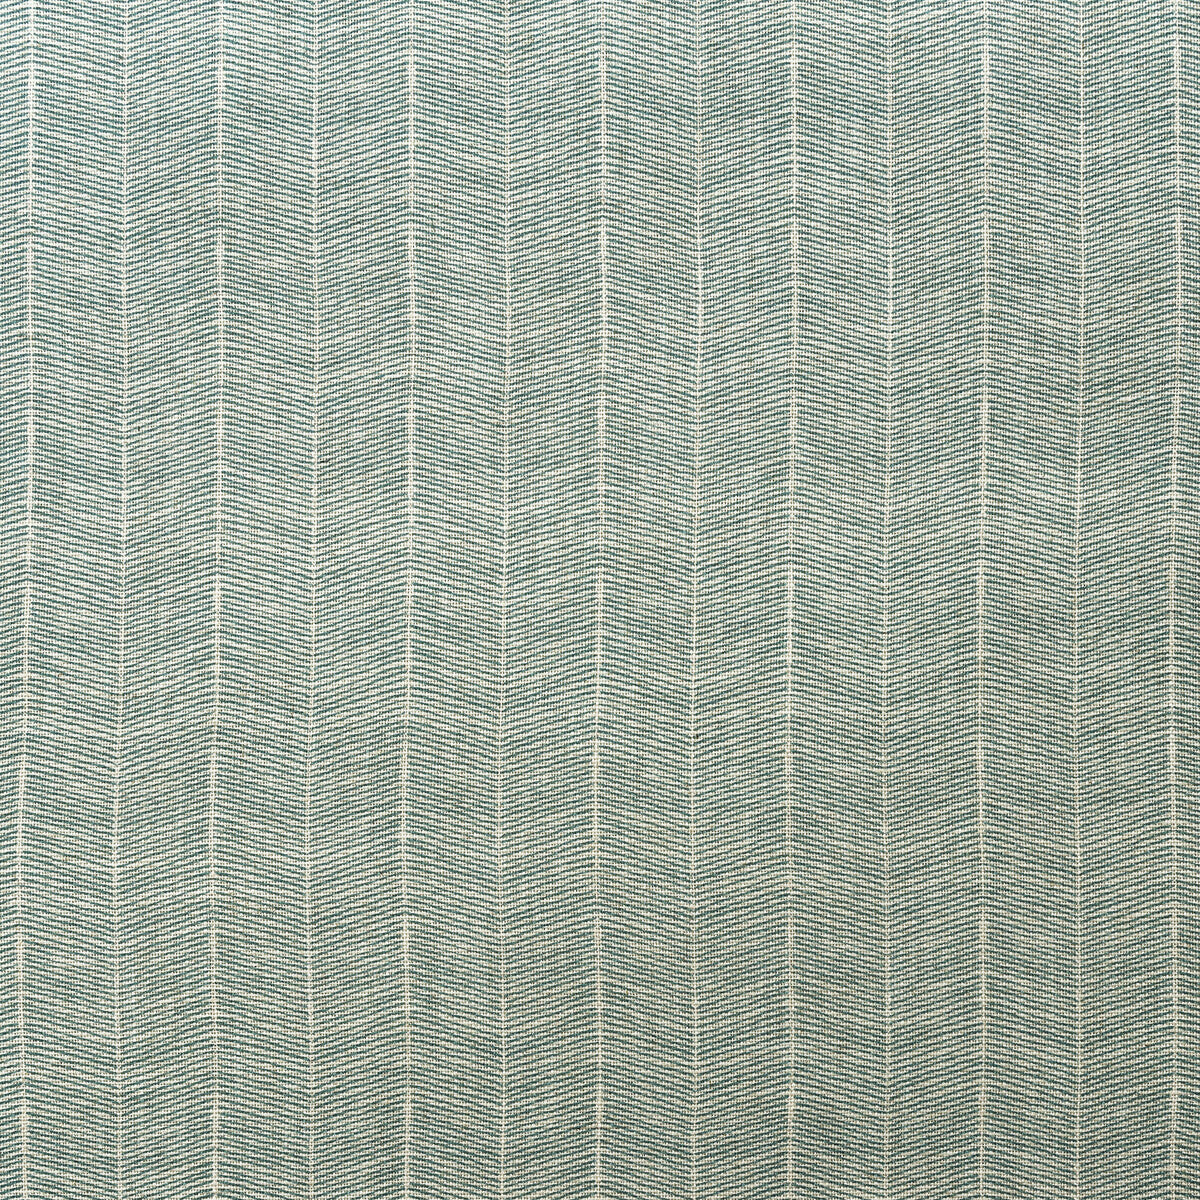 Furrow fabric in turquoise color - pattern AM100380.13.0 - by Kravet Couture in the Andrew Martin Garden Path collection